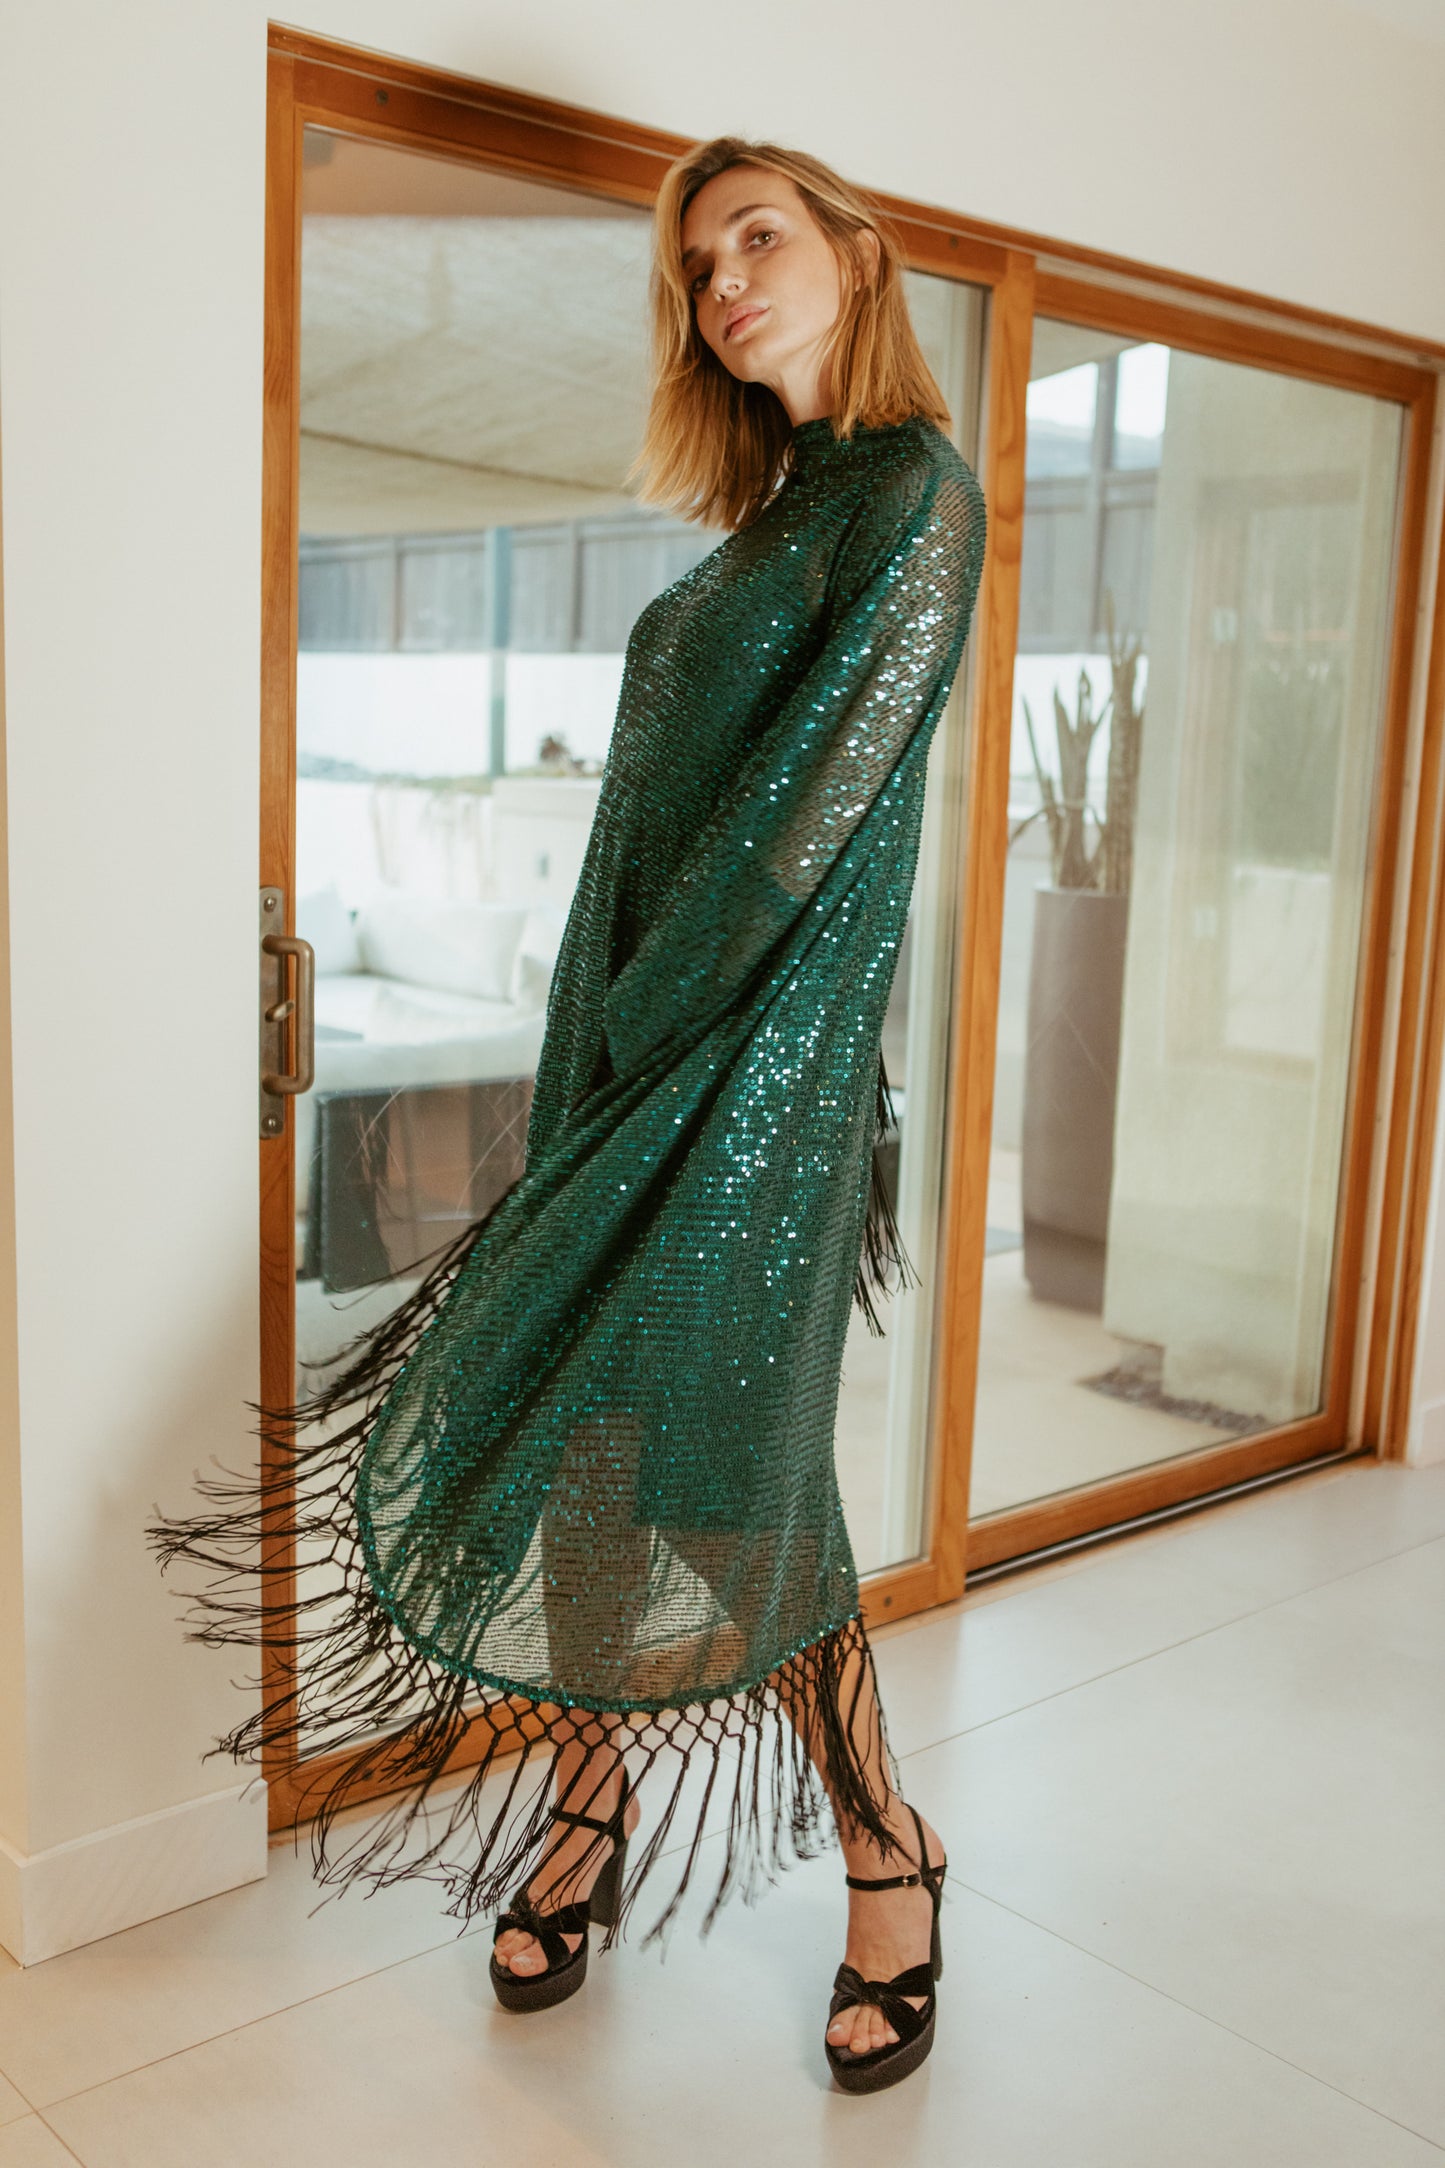 This caftan is a dazzling, full-length garment featuring a shimmering jade green sequin overlay on a mesh fabric. The sequins catch the light, creating a sparkling effect throughout. It has a mock neck collar with a straight, loose fit that drapes elegantly over the body. The edges of the caftan, including the hem and the sides, are embellished with long, silk black fringe that add movement and a playful flair.